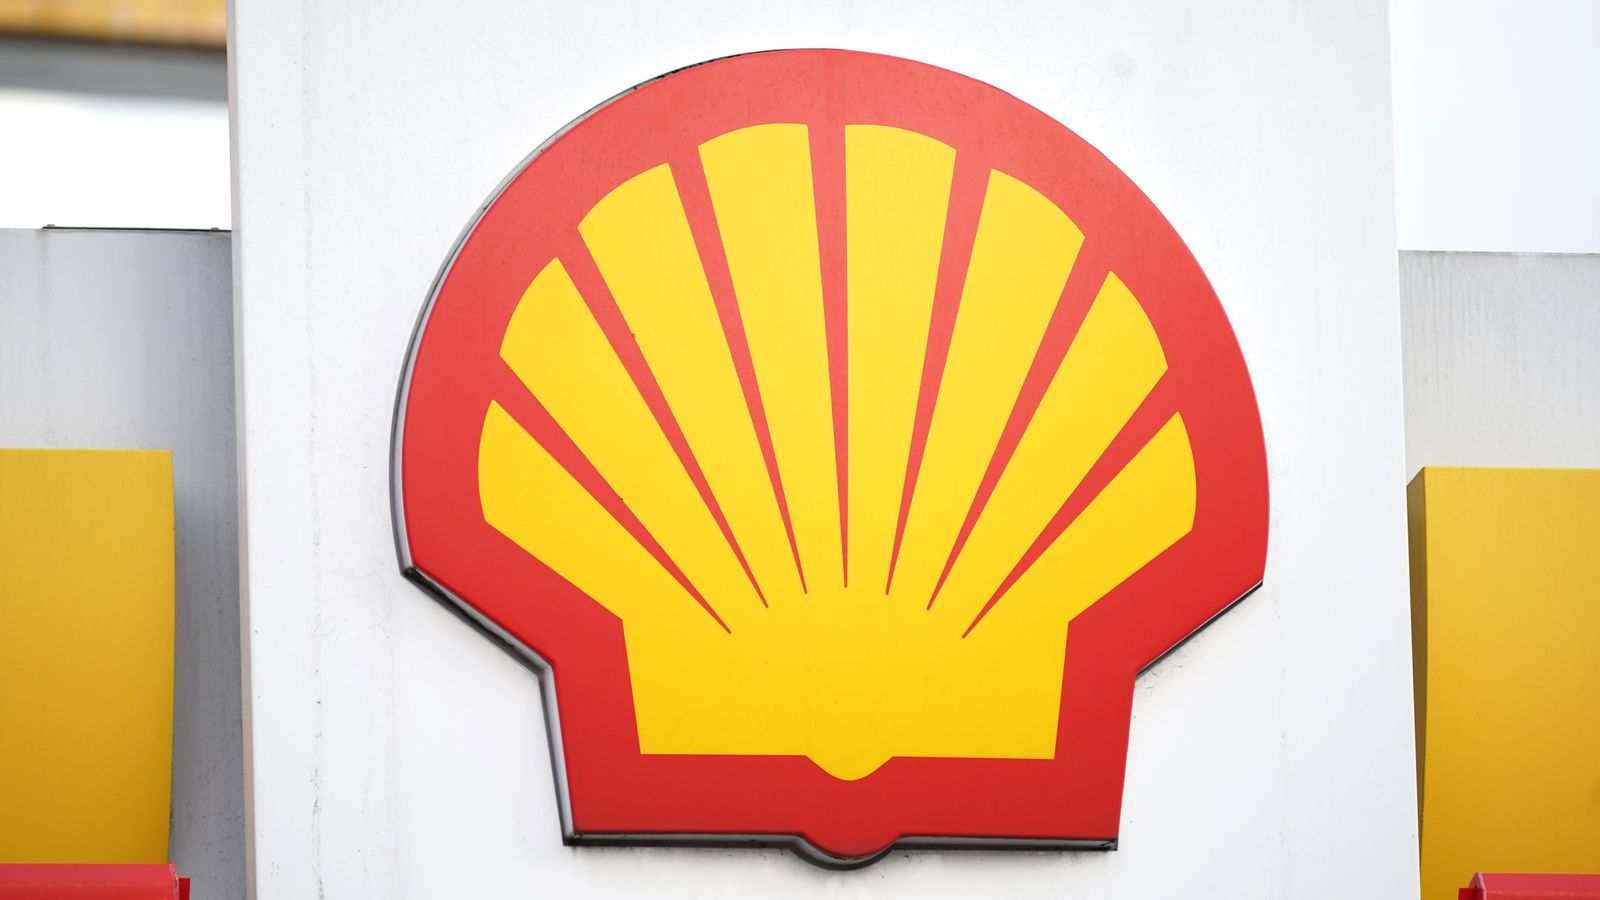 Shell Energy fined £1.4m by Ofcom for breaching consumer protection rules